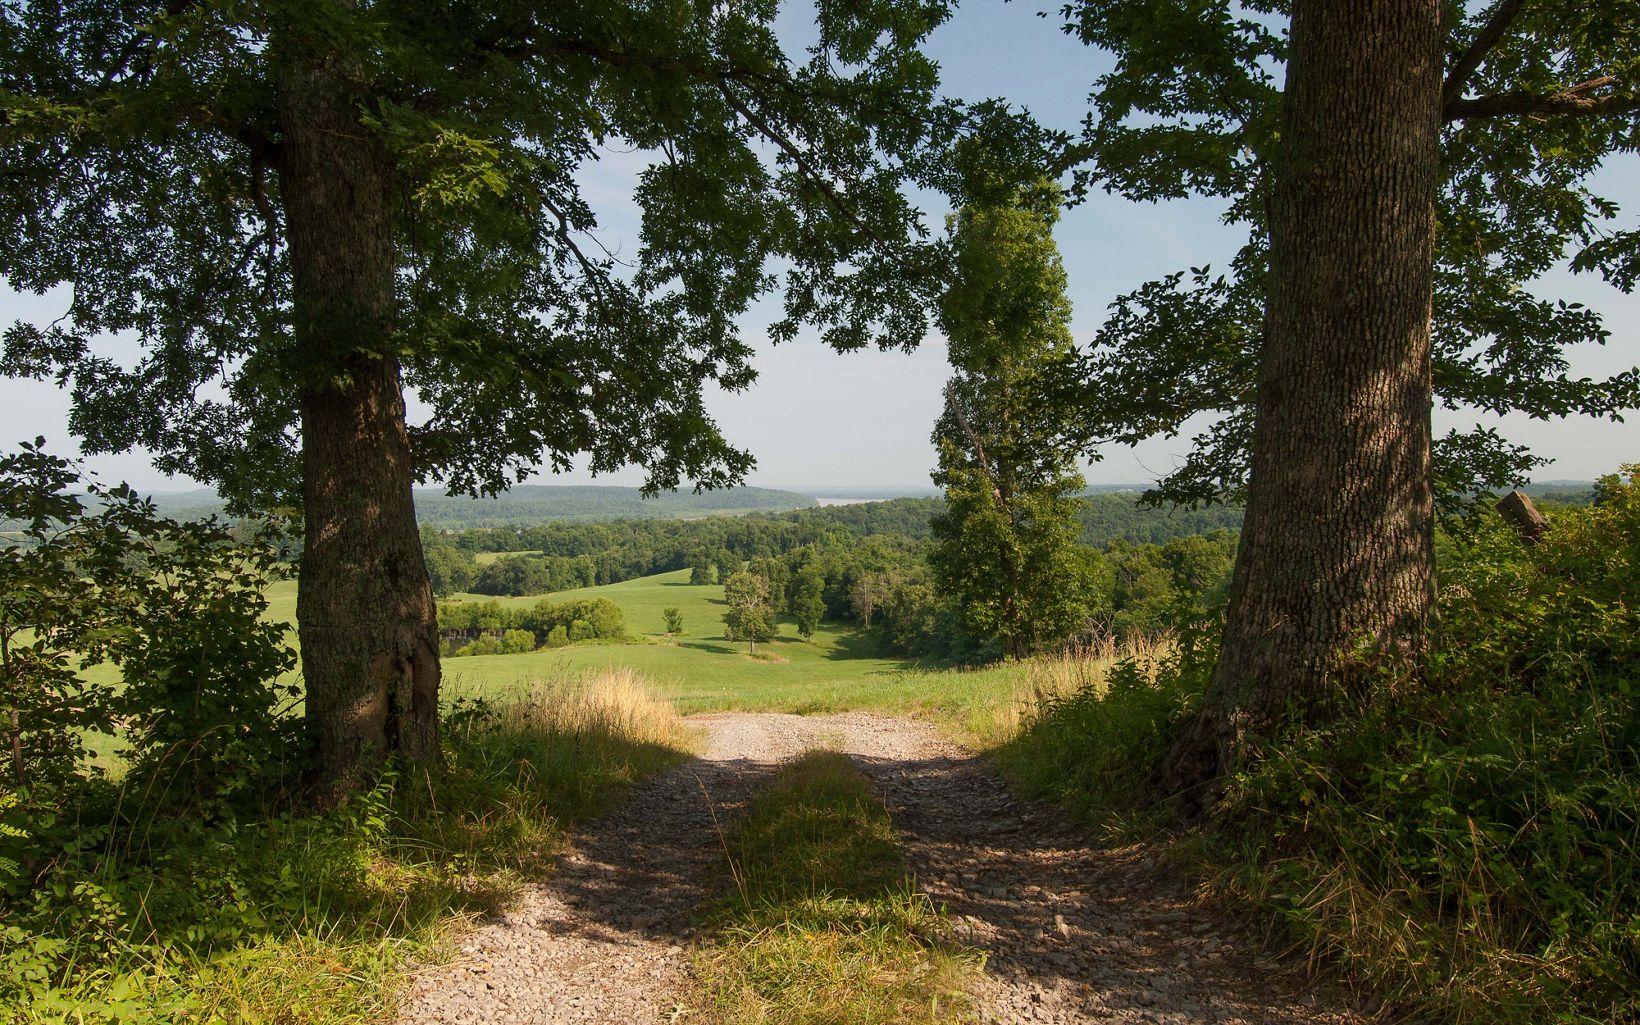 Kentucky's Big Rivers Corridor-Interior Road Visitors to the Big Rivers WMA will experience a variety of wildlife habitats and breathtaking views. Interior roads, such as this one, can be used to explore the property. © Mark Godfrey/The Nature Conservancy